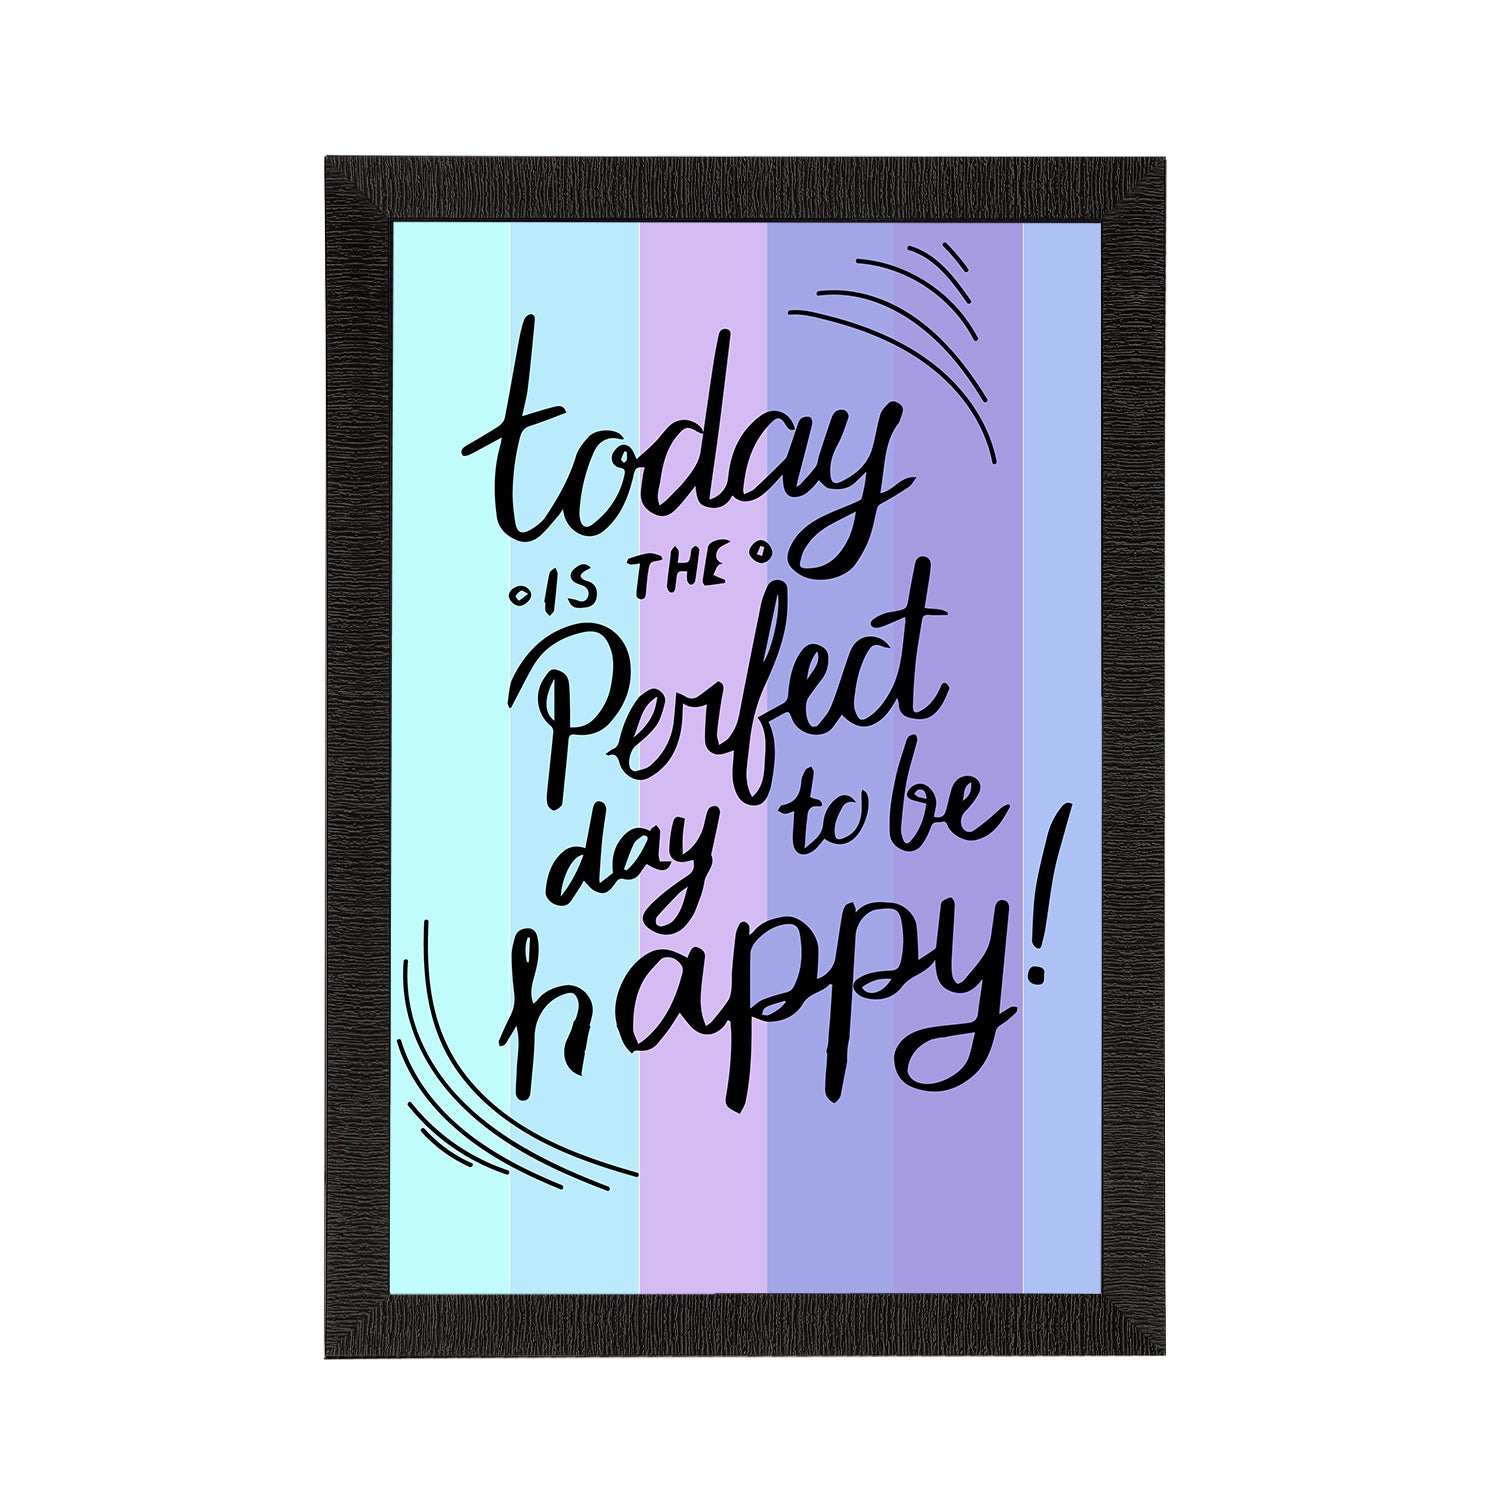 "Today Is The Perfect Day To Be Happy" Motivational Quote Satin Matt Texture UV Art Painting